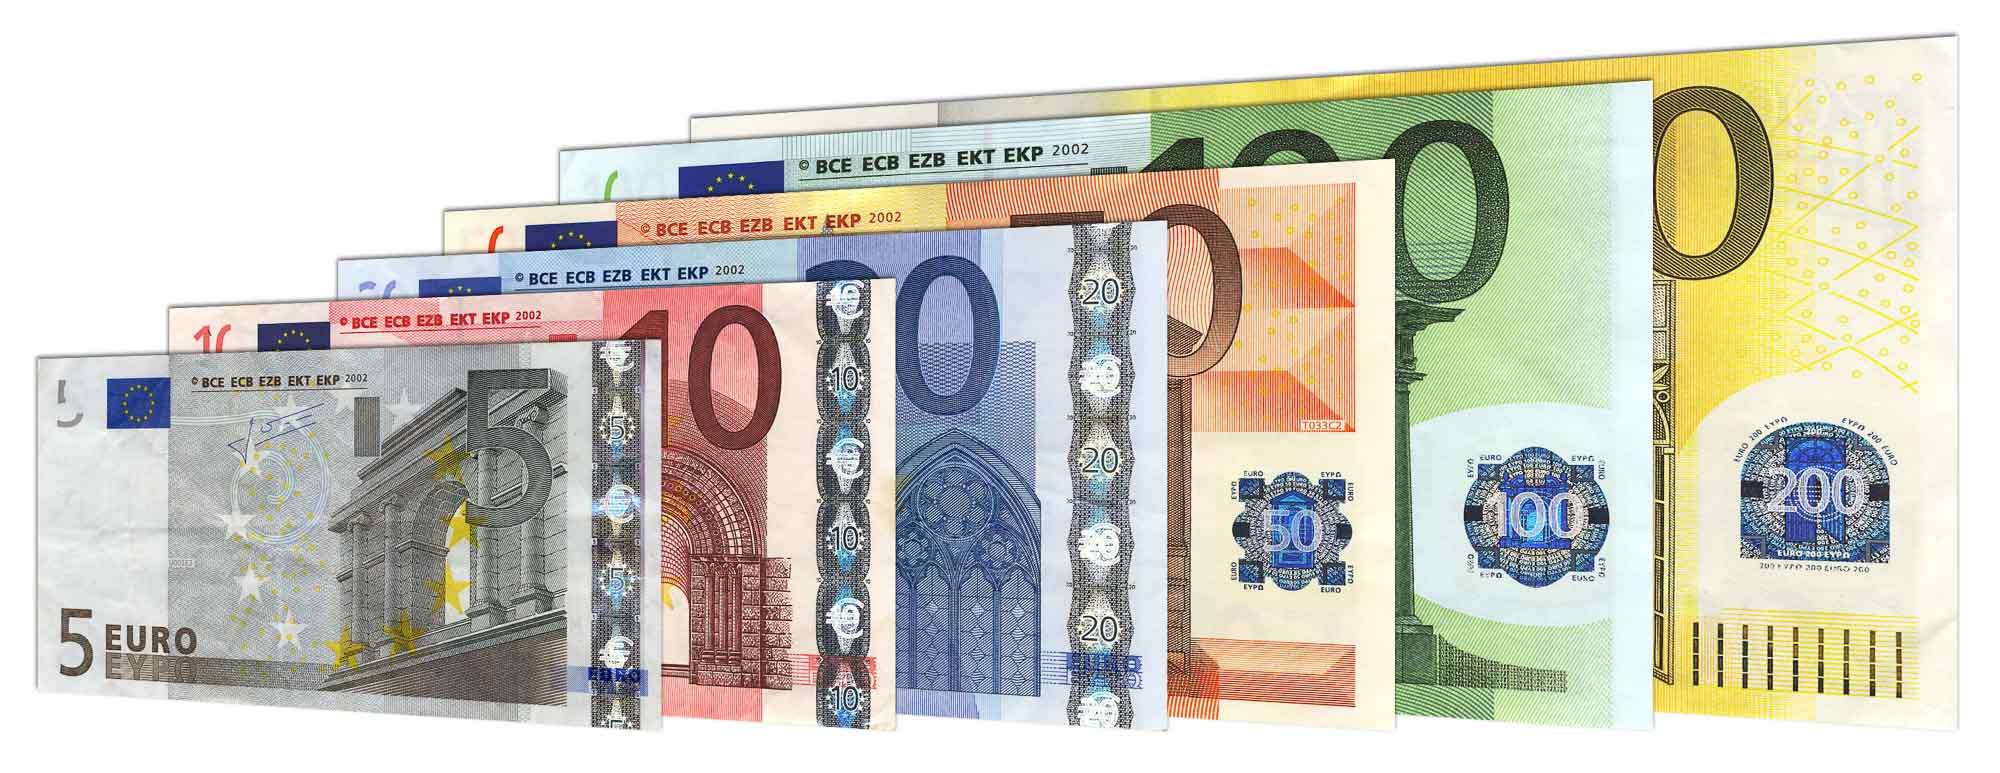 current-euro-banknotes